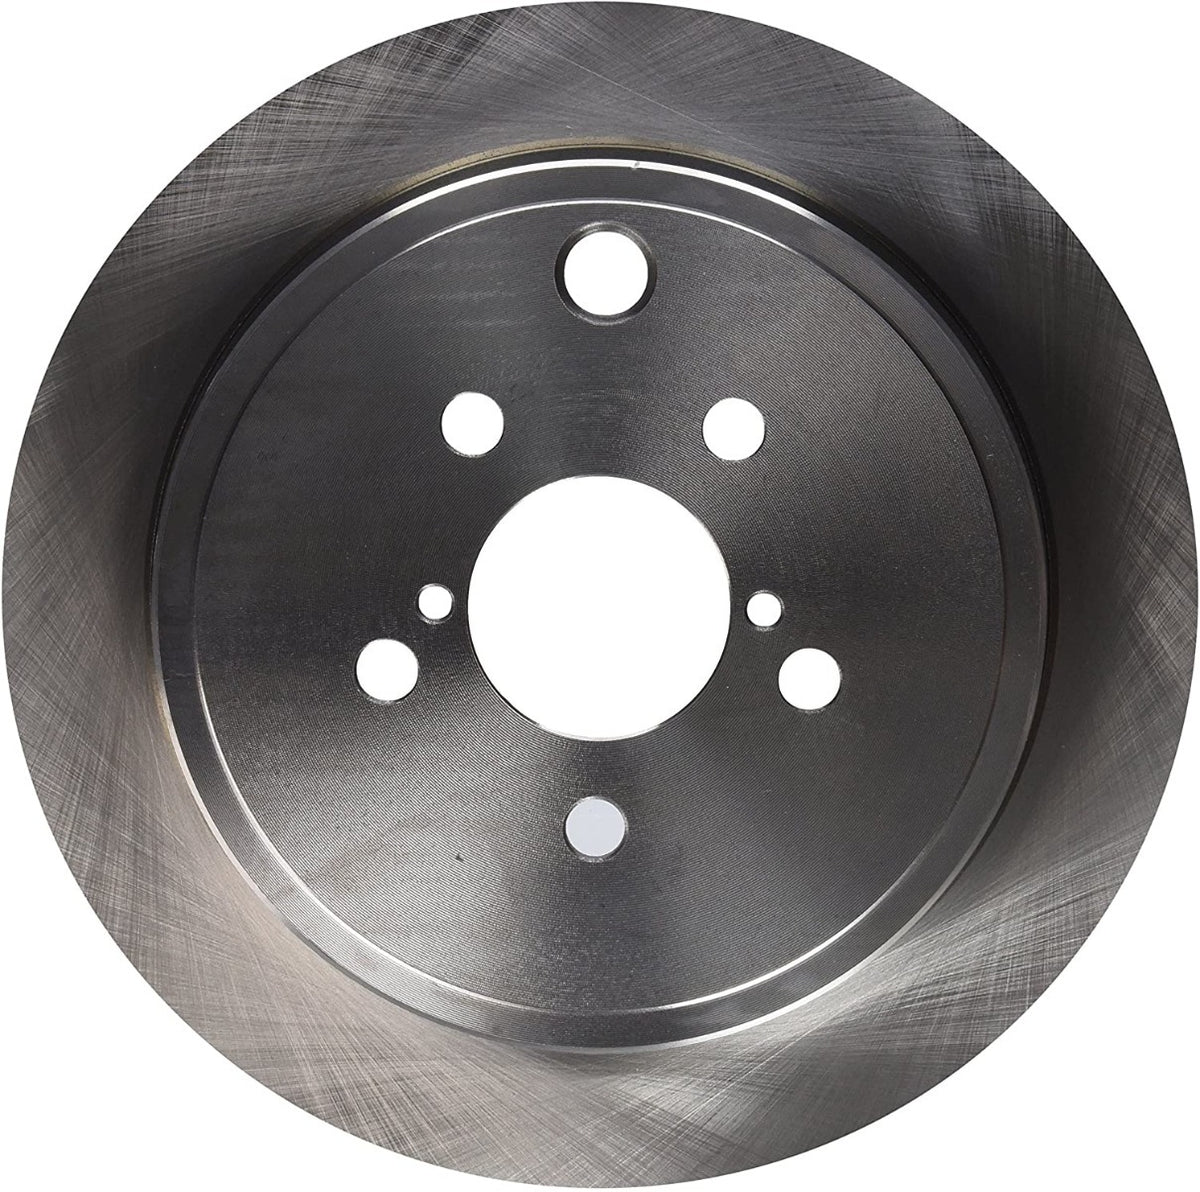 Centric 2013+ BRZ-FRS-GT86 Standard rear Brake rotor, for cars with Solid Rear Disc and 277mm Front Disc